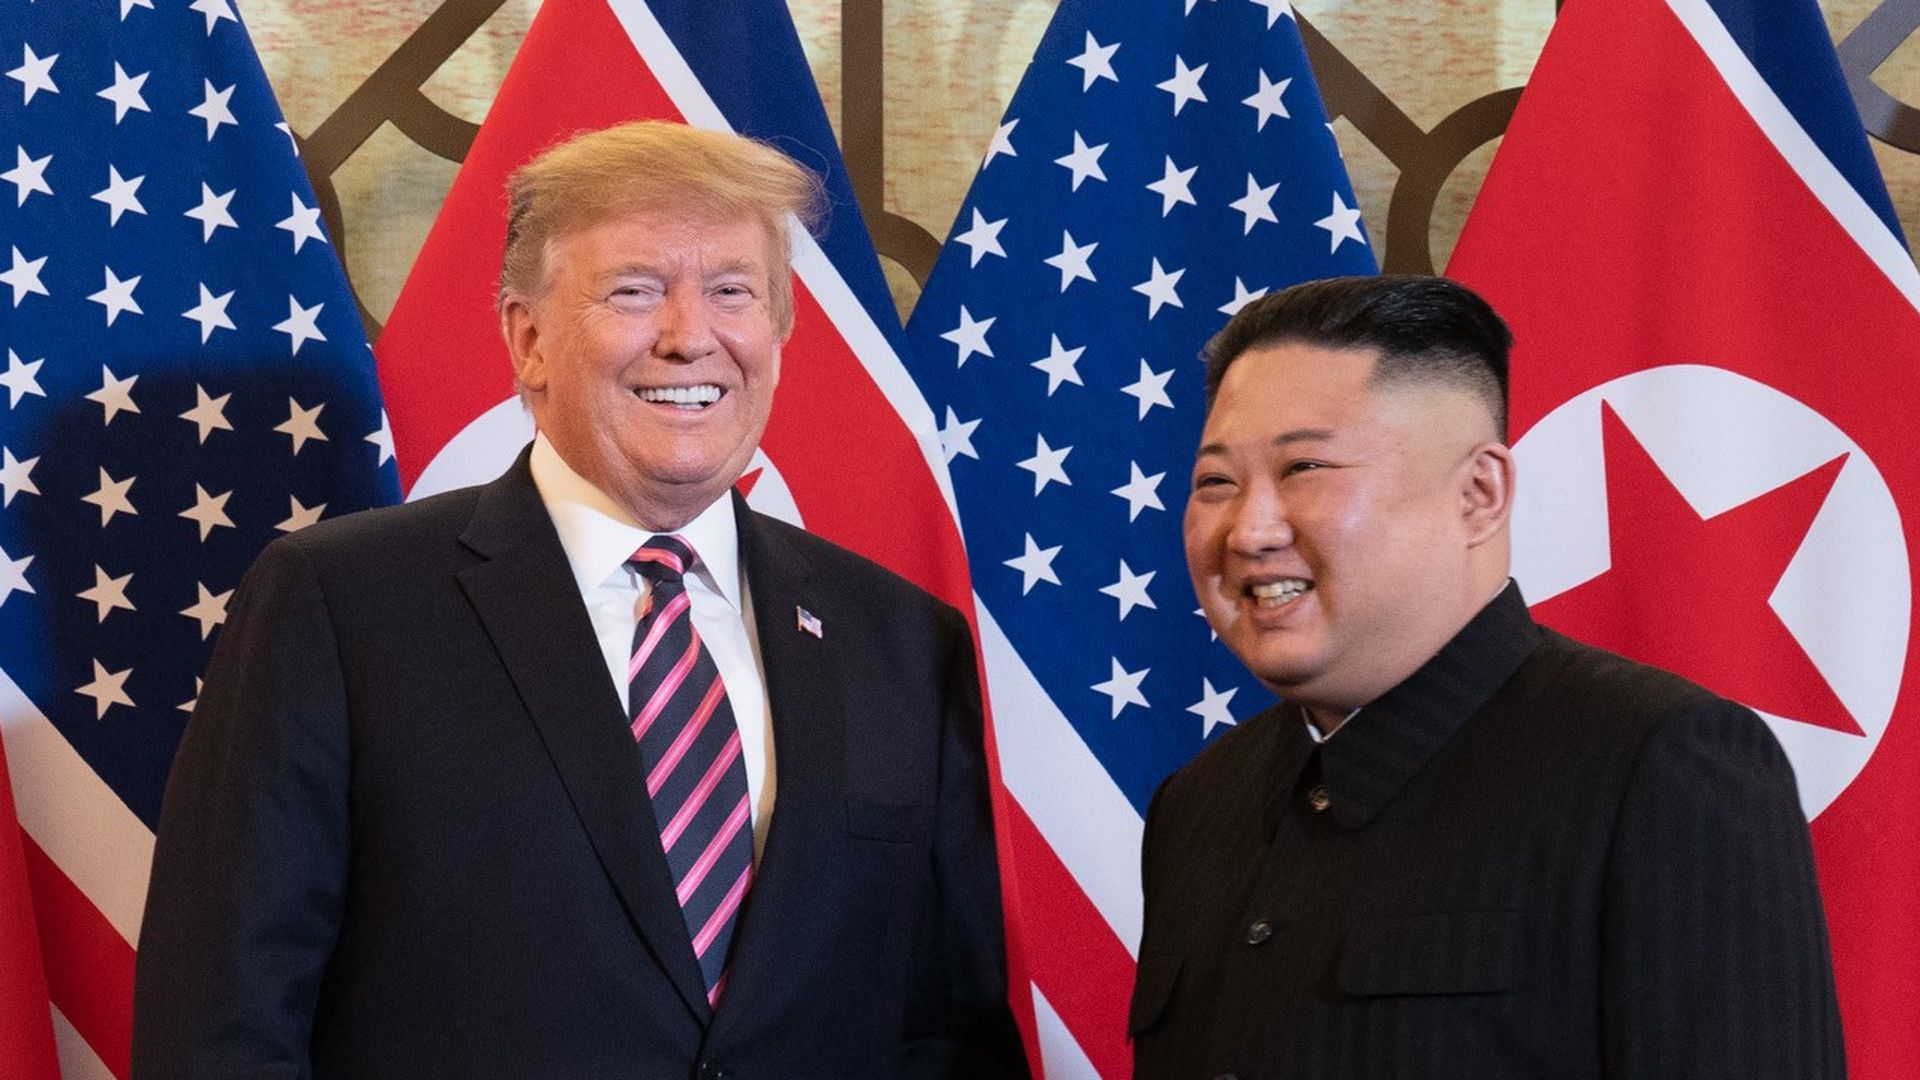 Researchers say they observed attacks as President Trump met with Kim Jong-un.